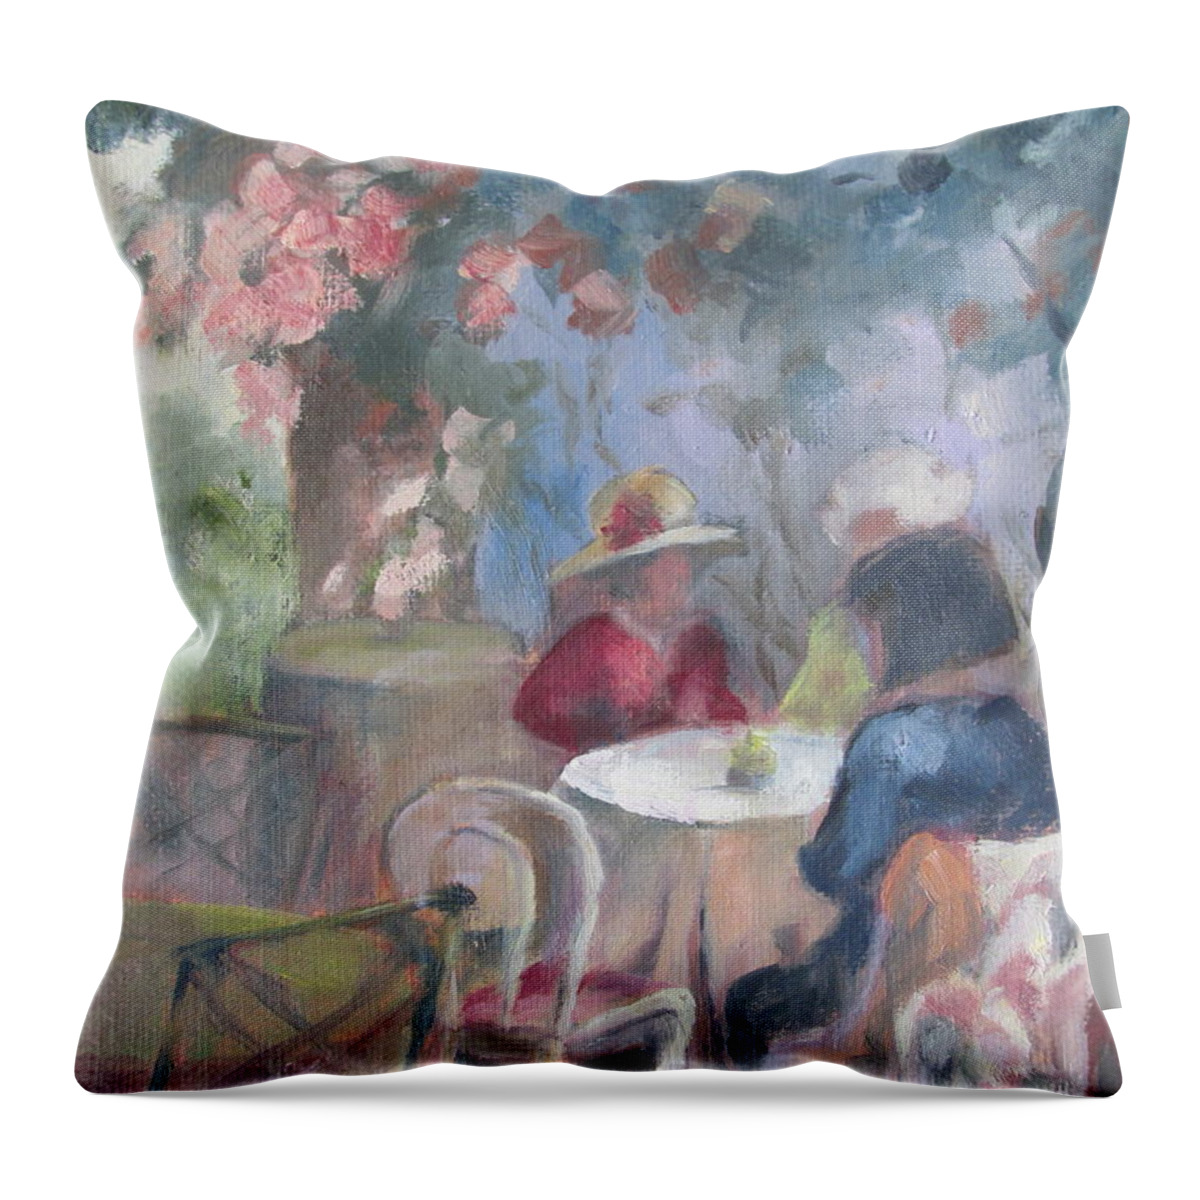  Tea Throw Pillow featuring the painting Waiting for Tea by Susan Richardson